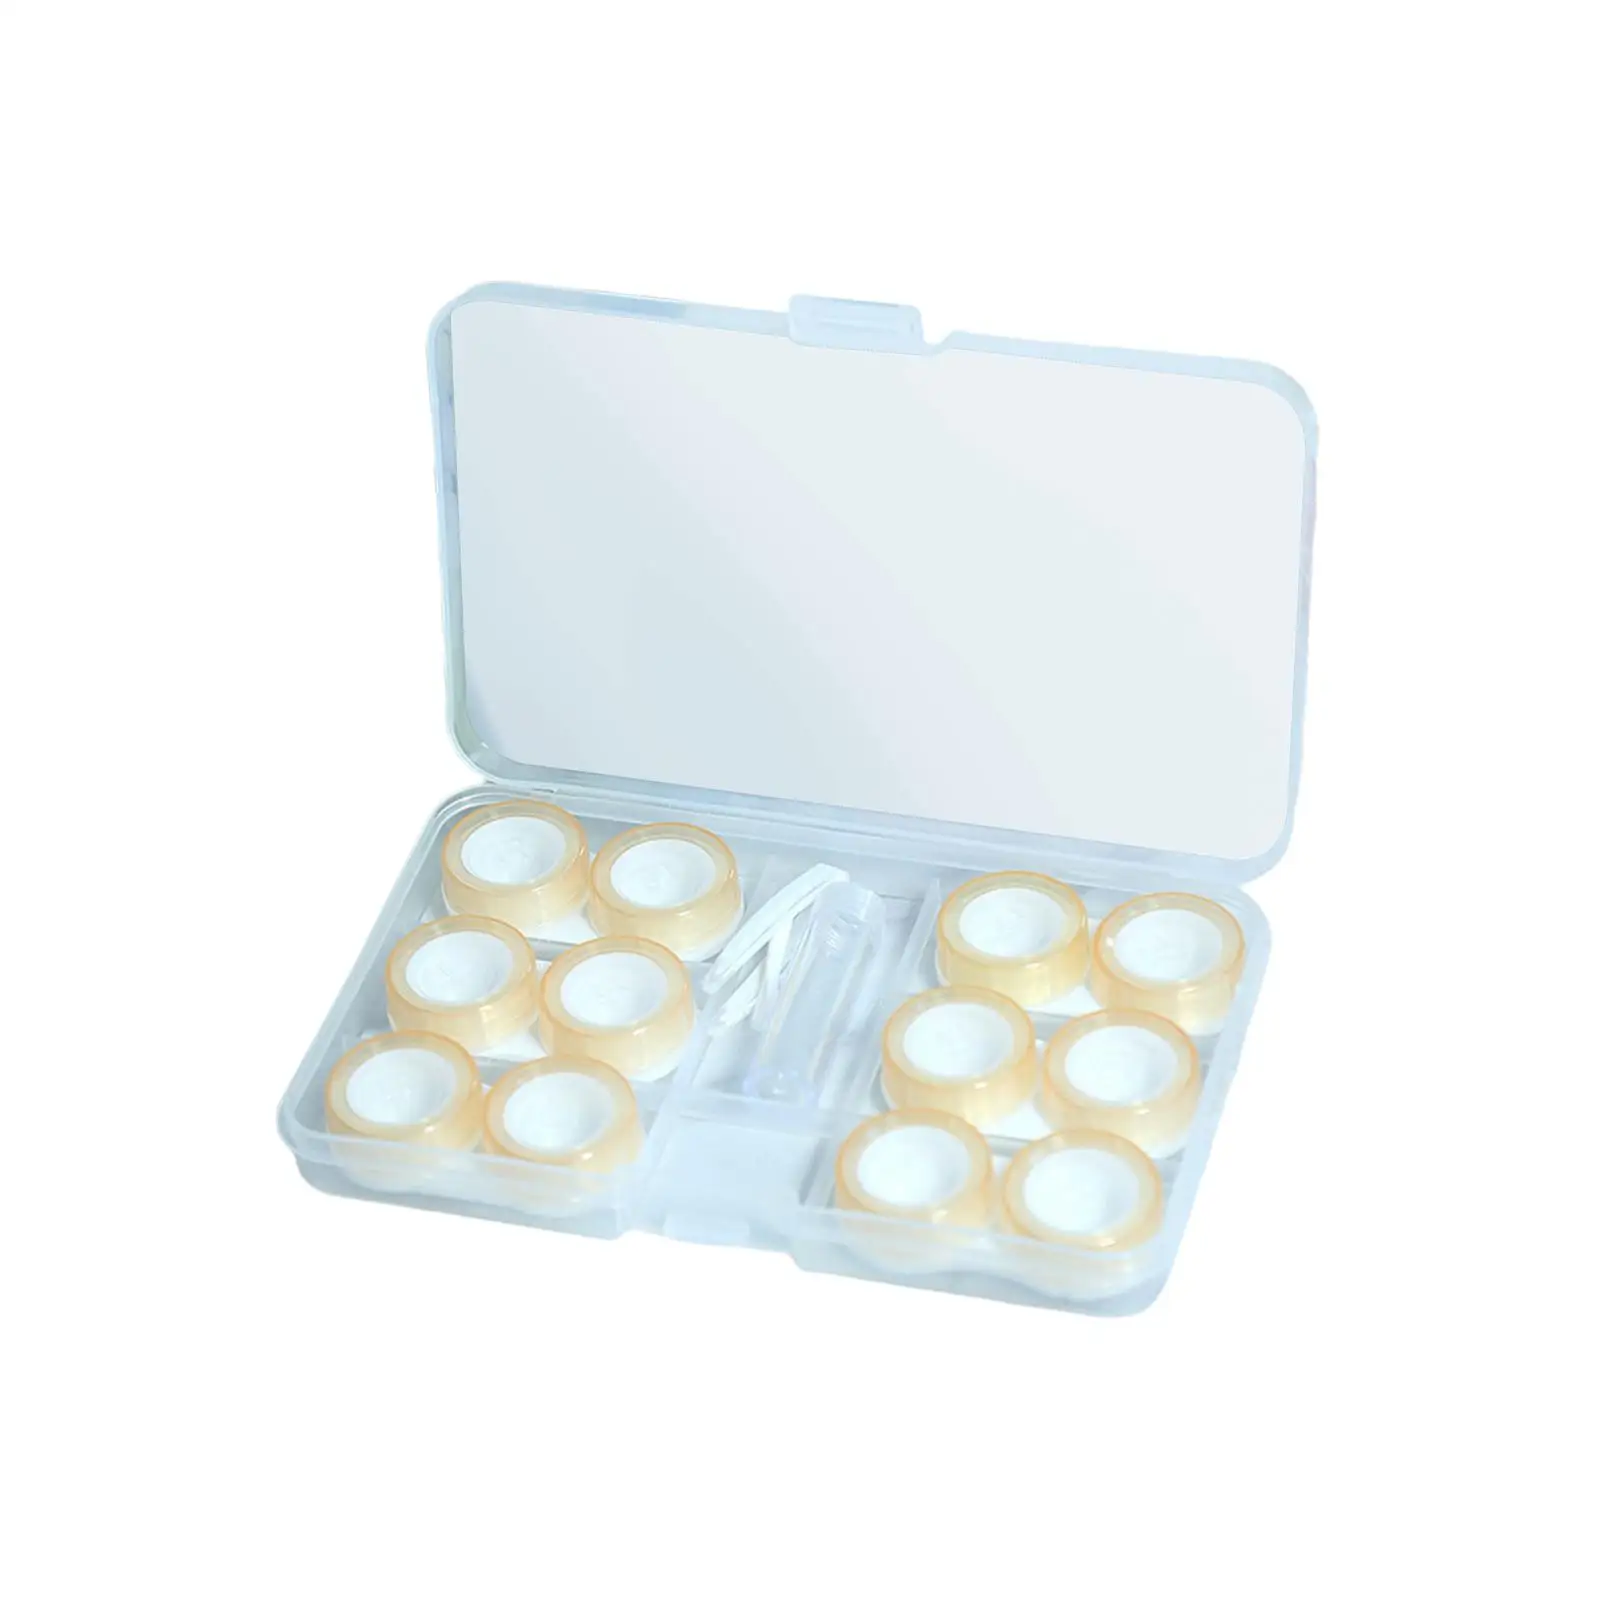 Portable 6 Pairs Contact Lens Case Set Small Size Convenient with Anti Leaking Silicone Seals Durable Sturdy for Women